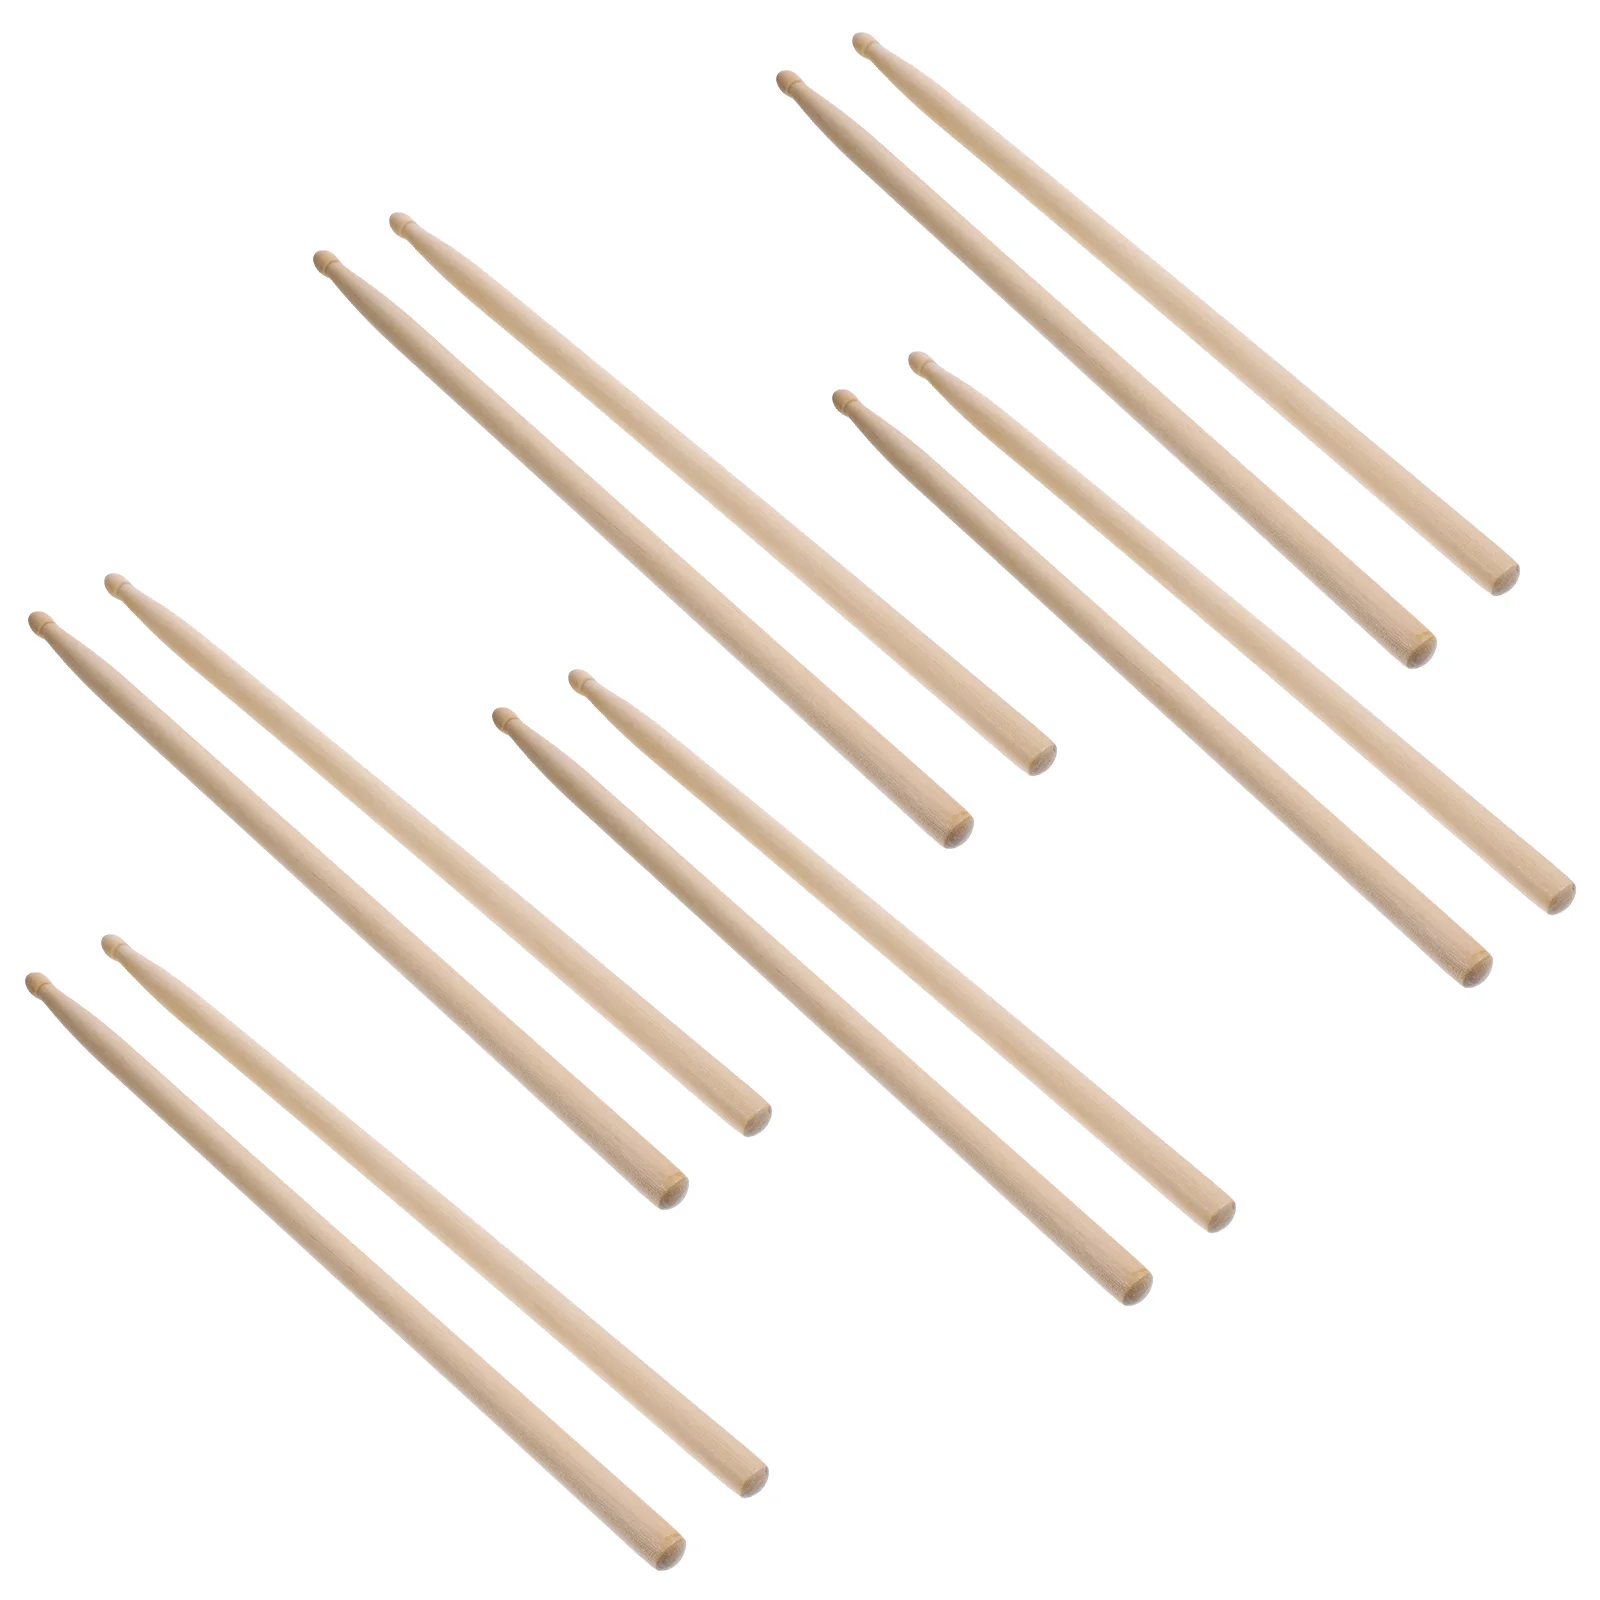 Instrument Mallets 5a Maple Wood Sticks Musical Instruments Drumsticks For Practice glockenspiel drumsticks wood handle mallets percussion stick musical instrument accessories energy chime xylophone wood